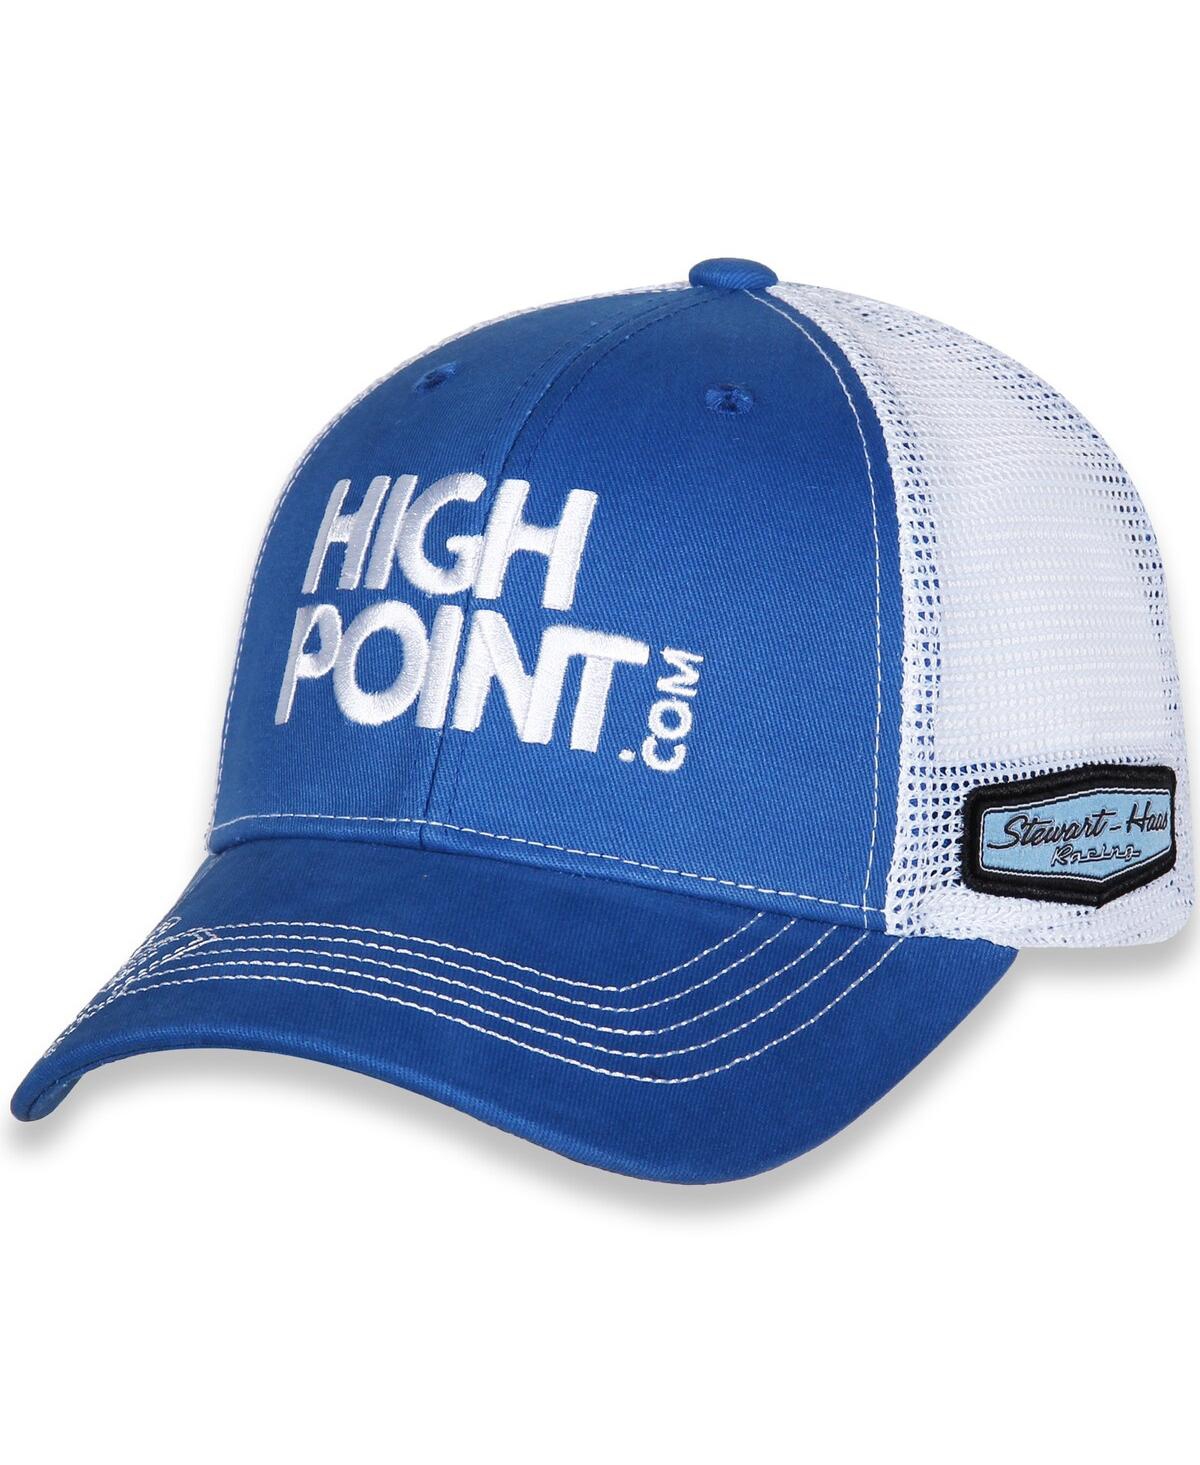 Stewart-haas Racing Team Collection Men's  Royal And White Chase Briscoe Highpoint.com Adjustable Hat In Royal,white